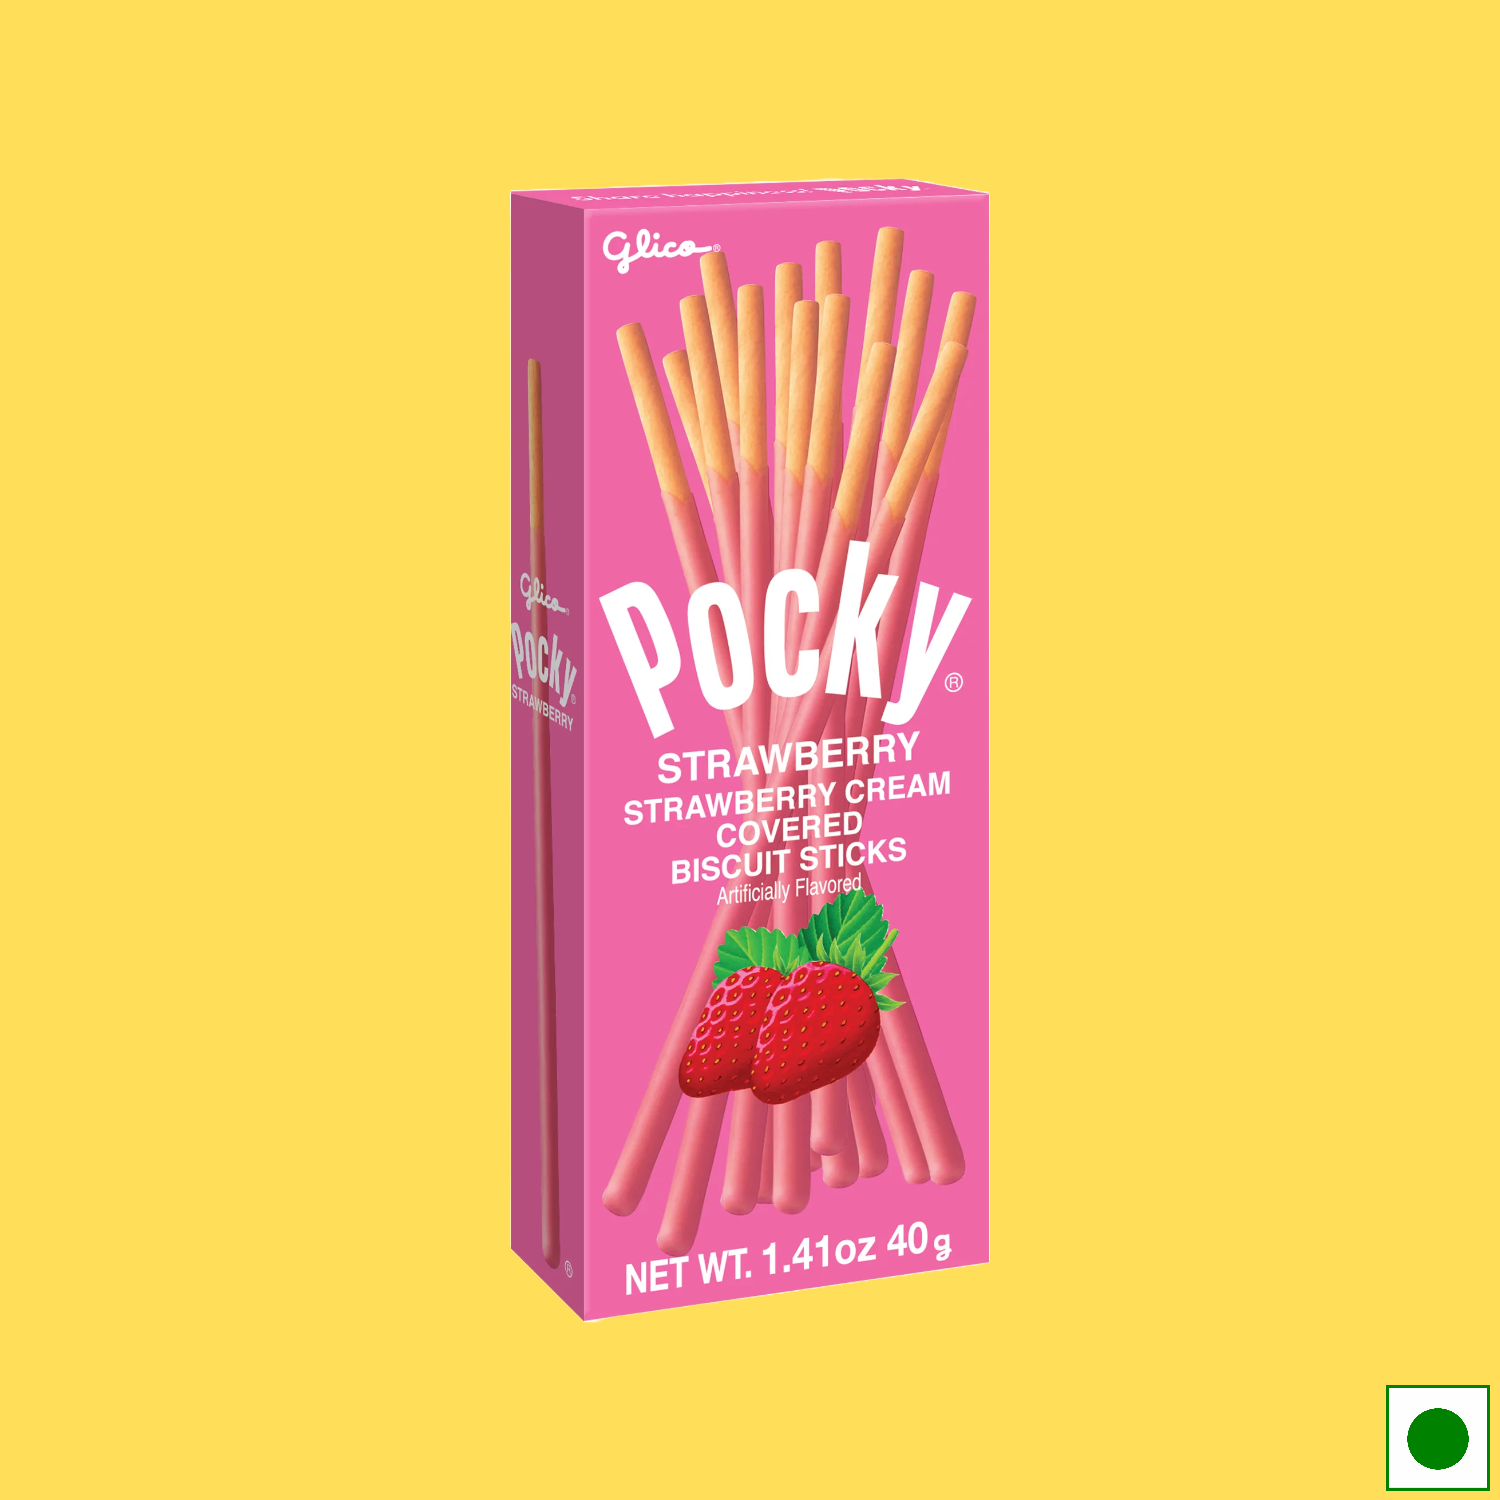 Pocky Strawberry Cream Covered Biscuit Sticks, 40g (Imported)